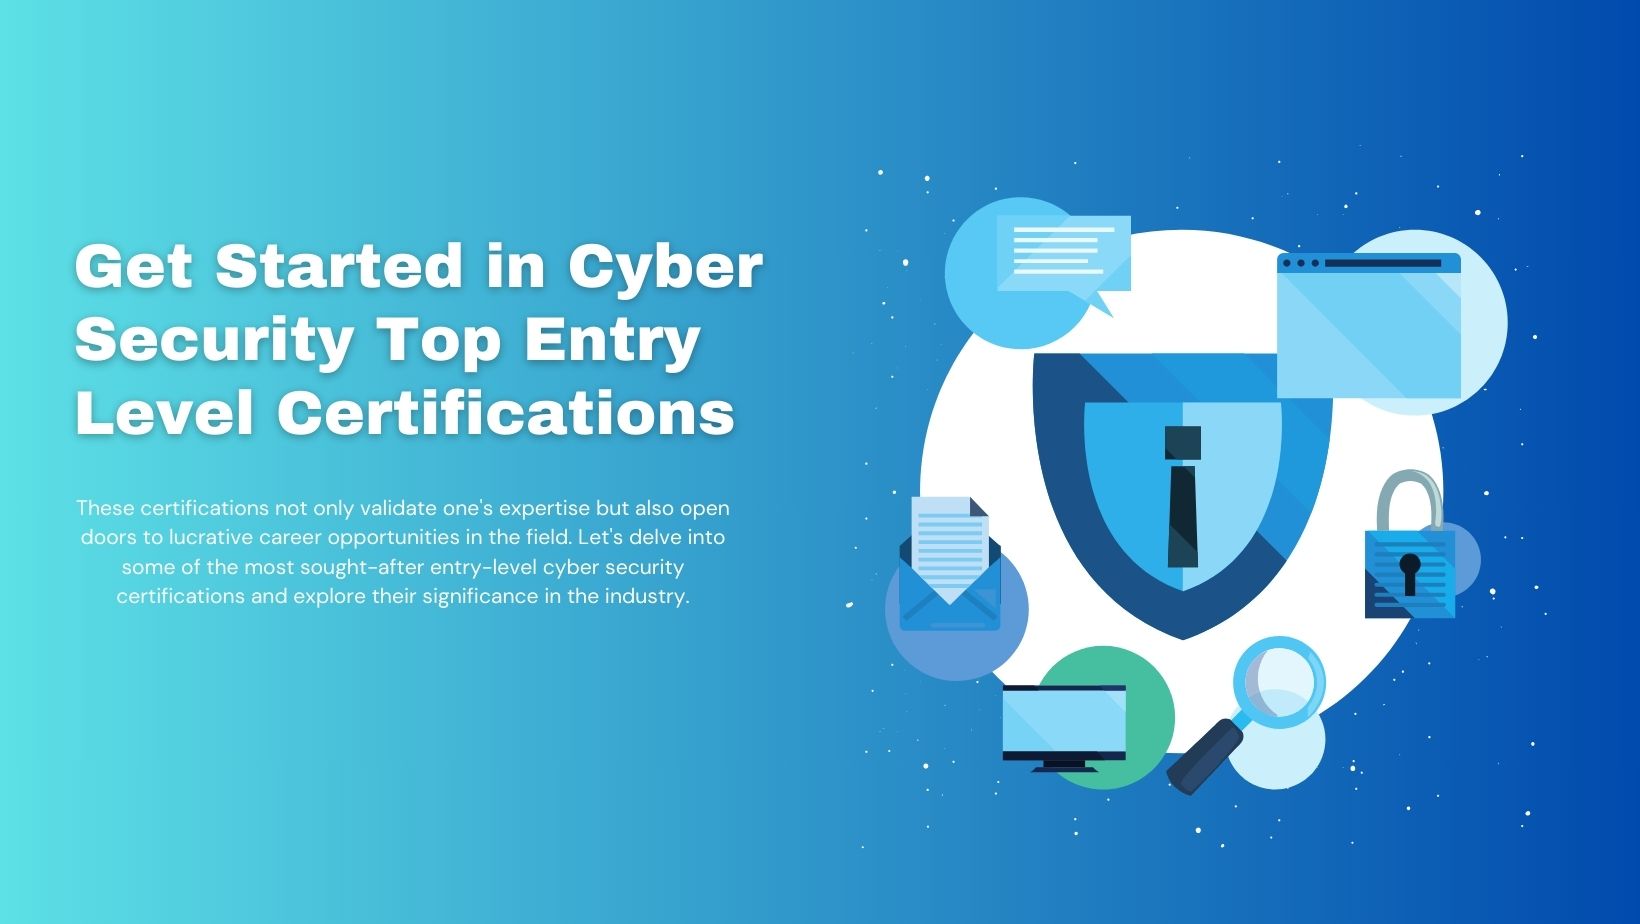 Get Started in Cyber Security: Top Entry Level Certifications